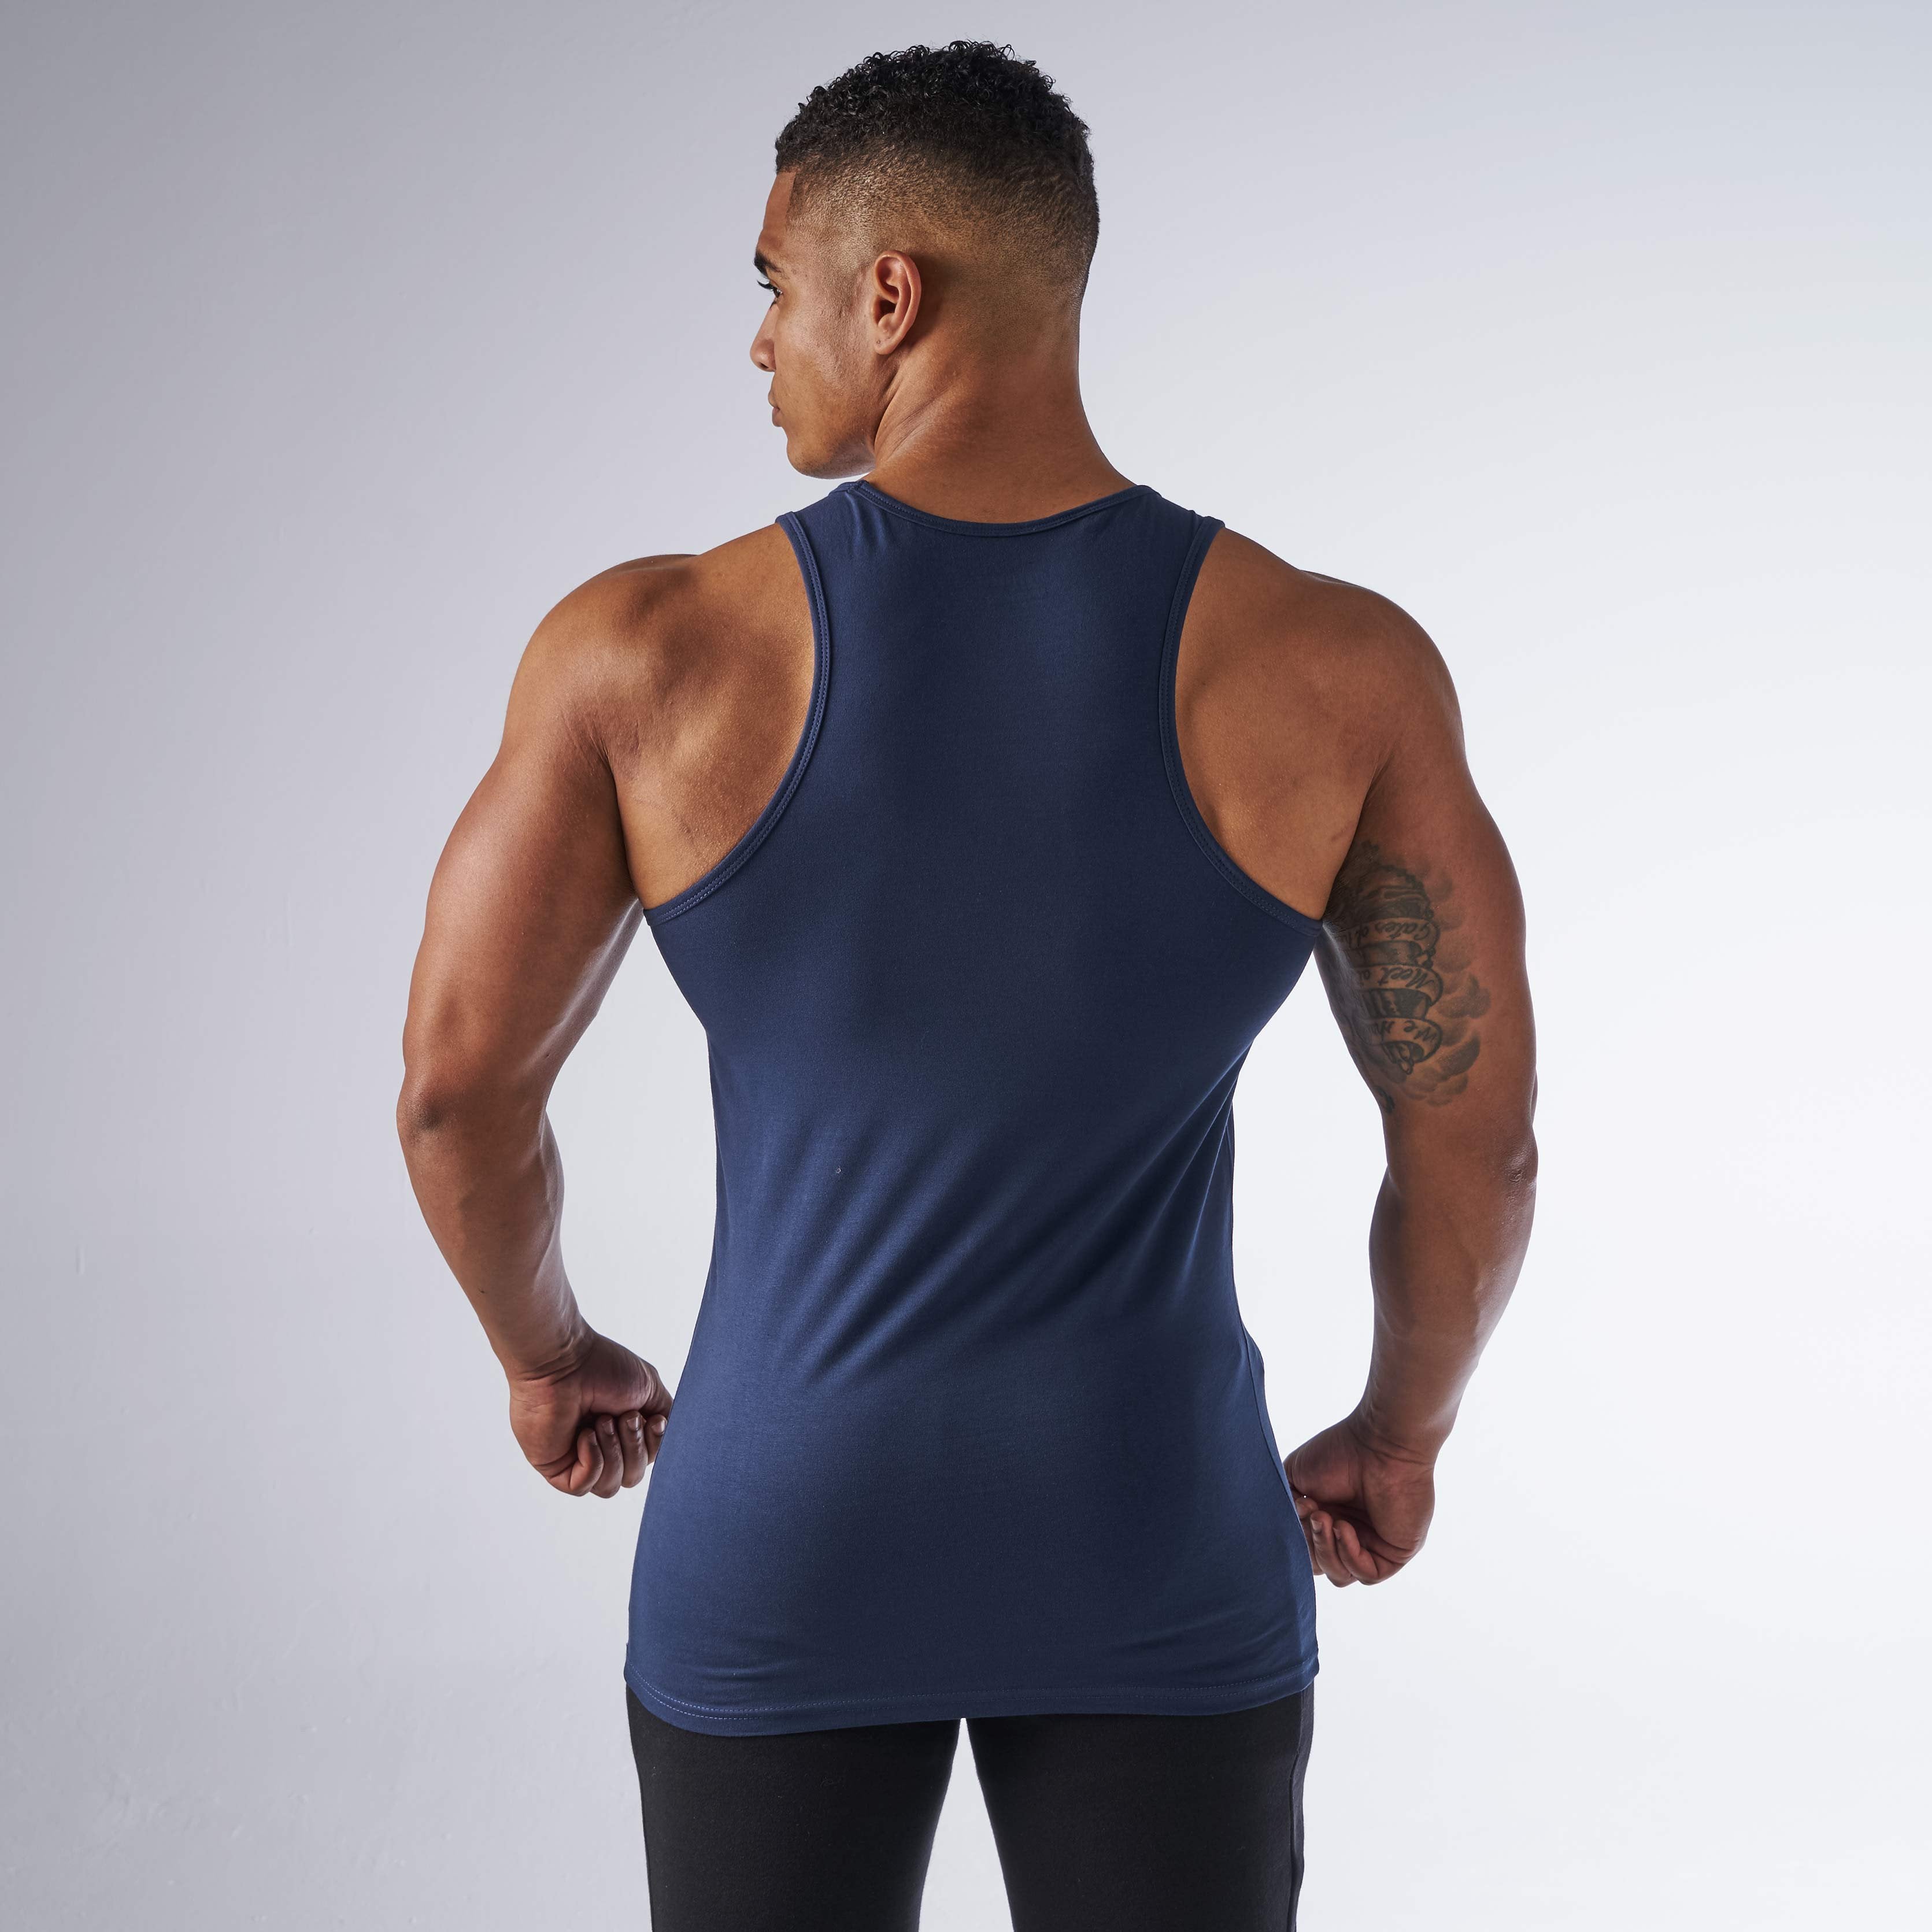 GymShark Fitness Tank in Sapphire Blue - view 3